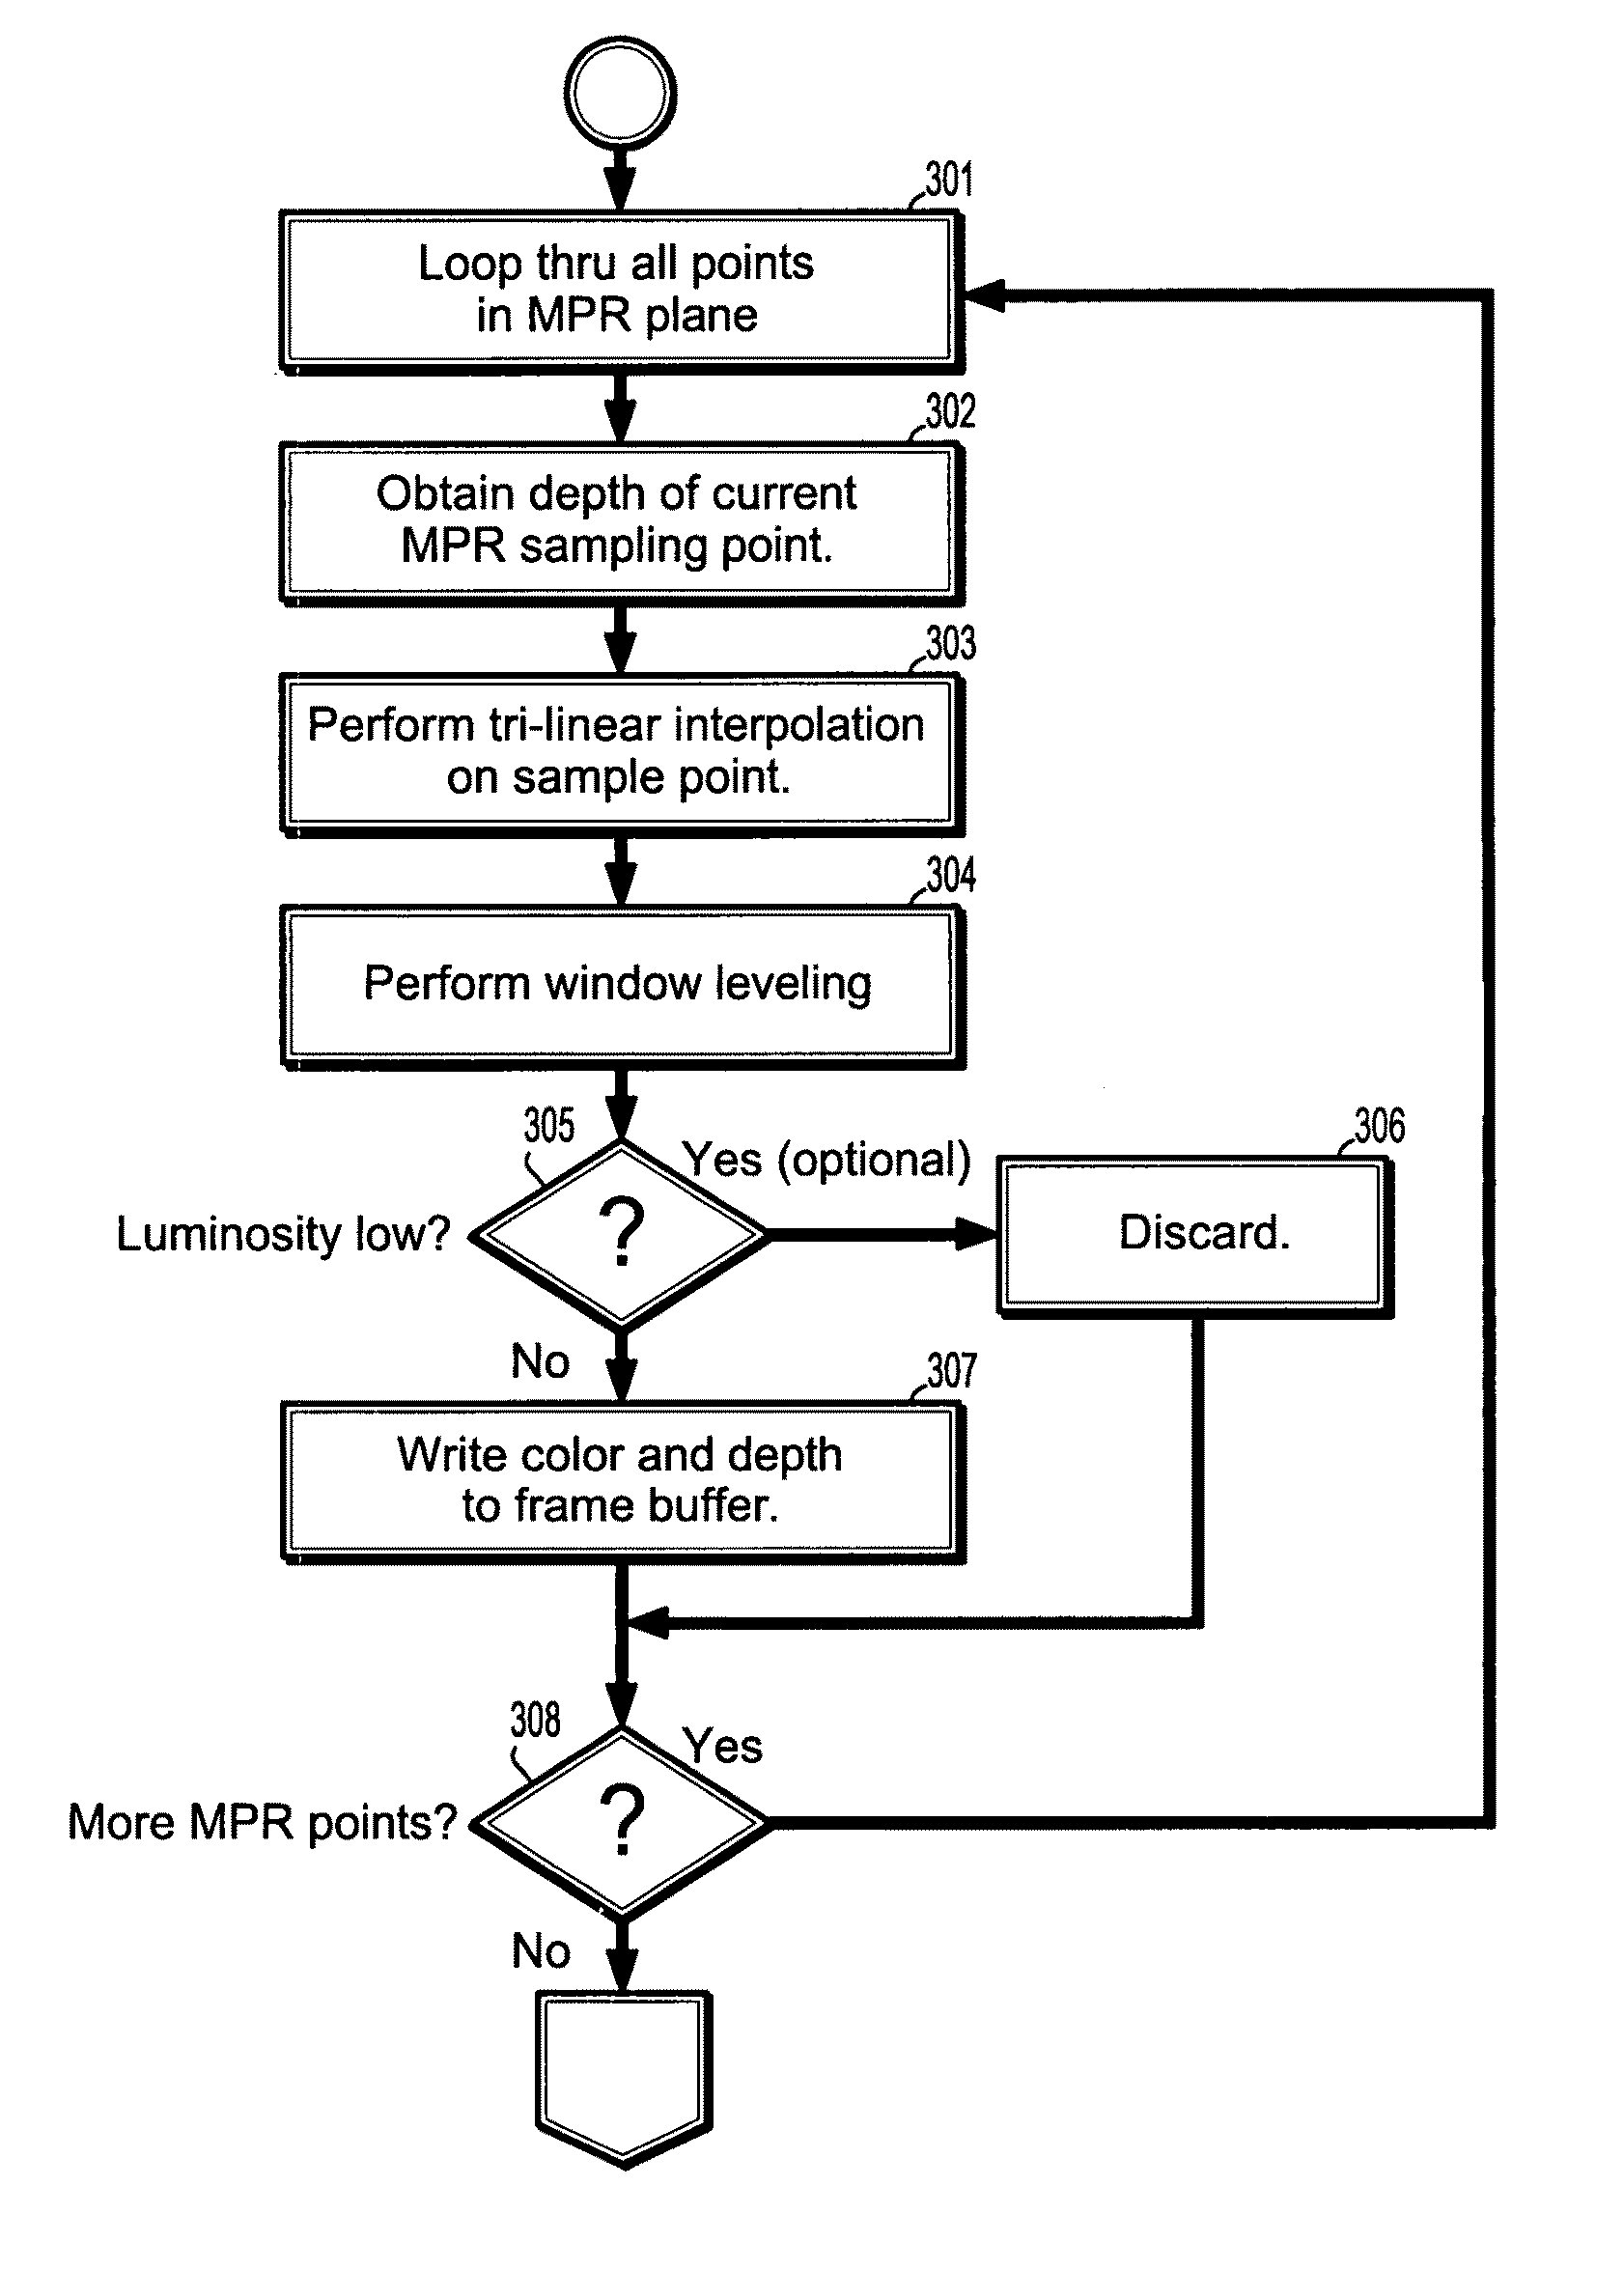 System and method for in-context MPR visualization using virtual incision volume visualization